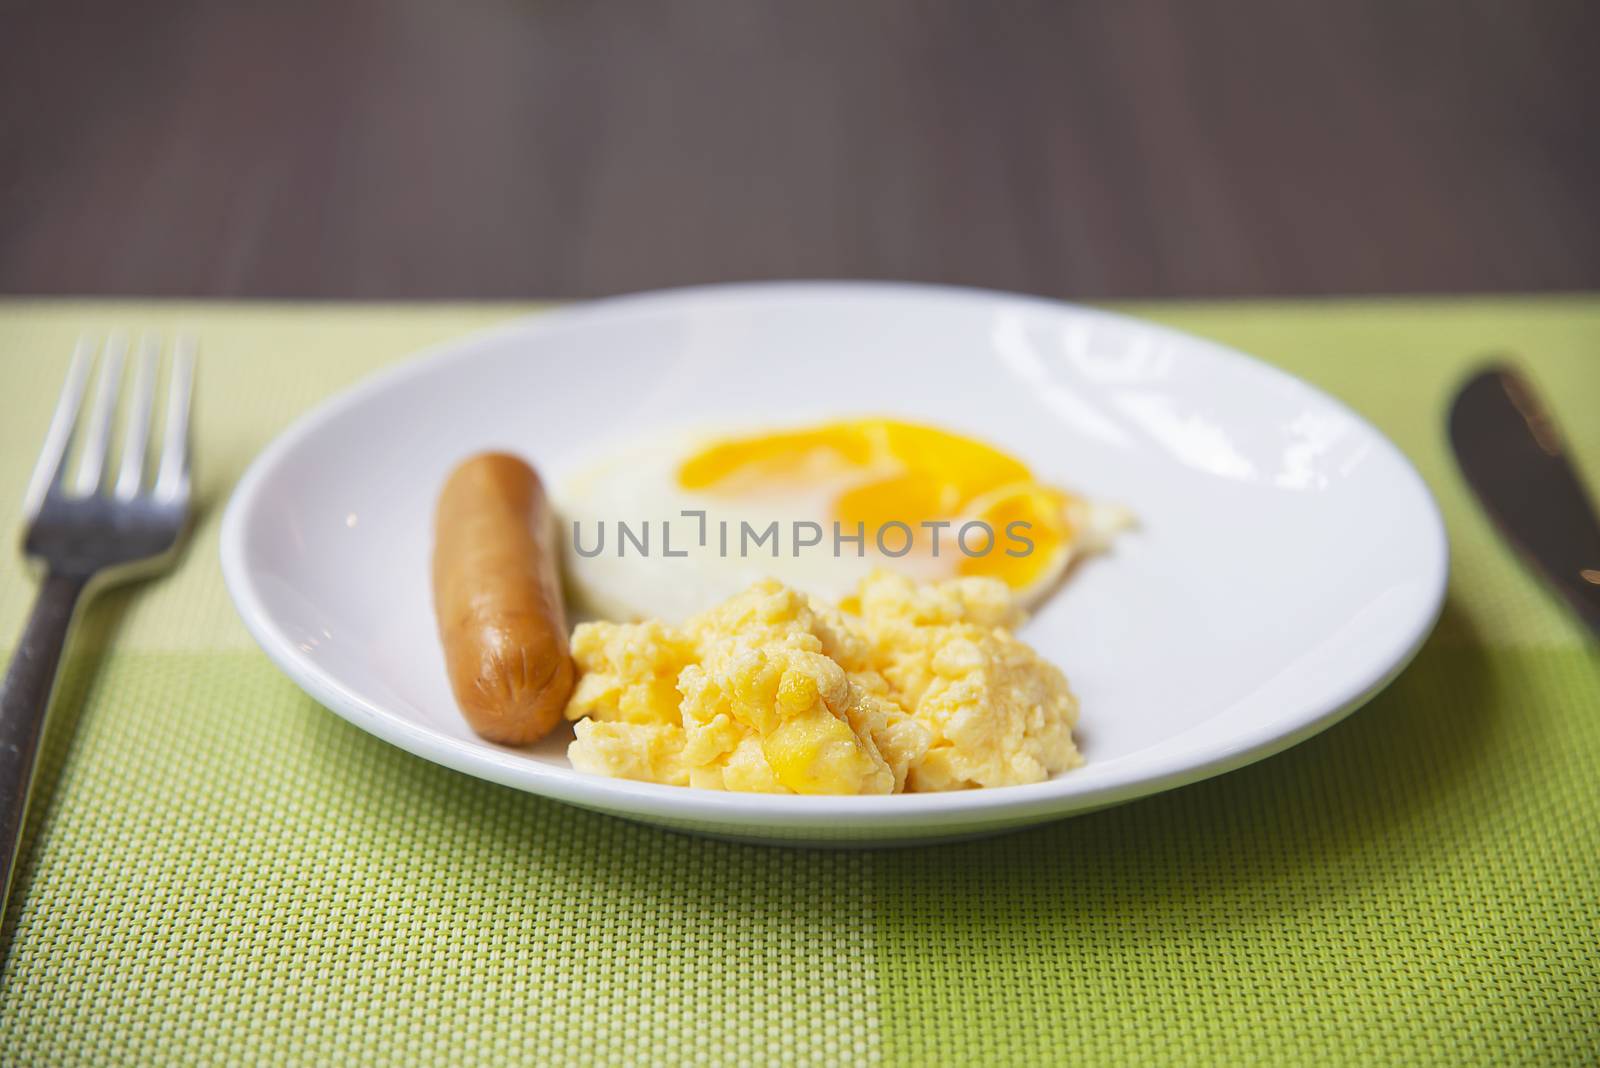 Sausage with egg breakfast set by pairhandmade